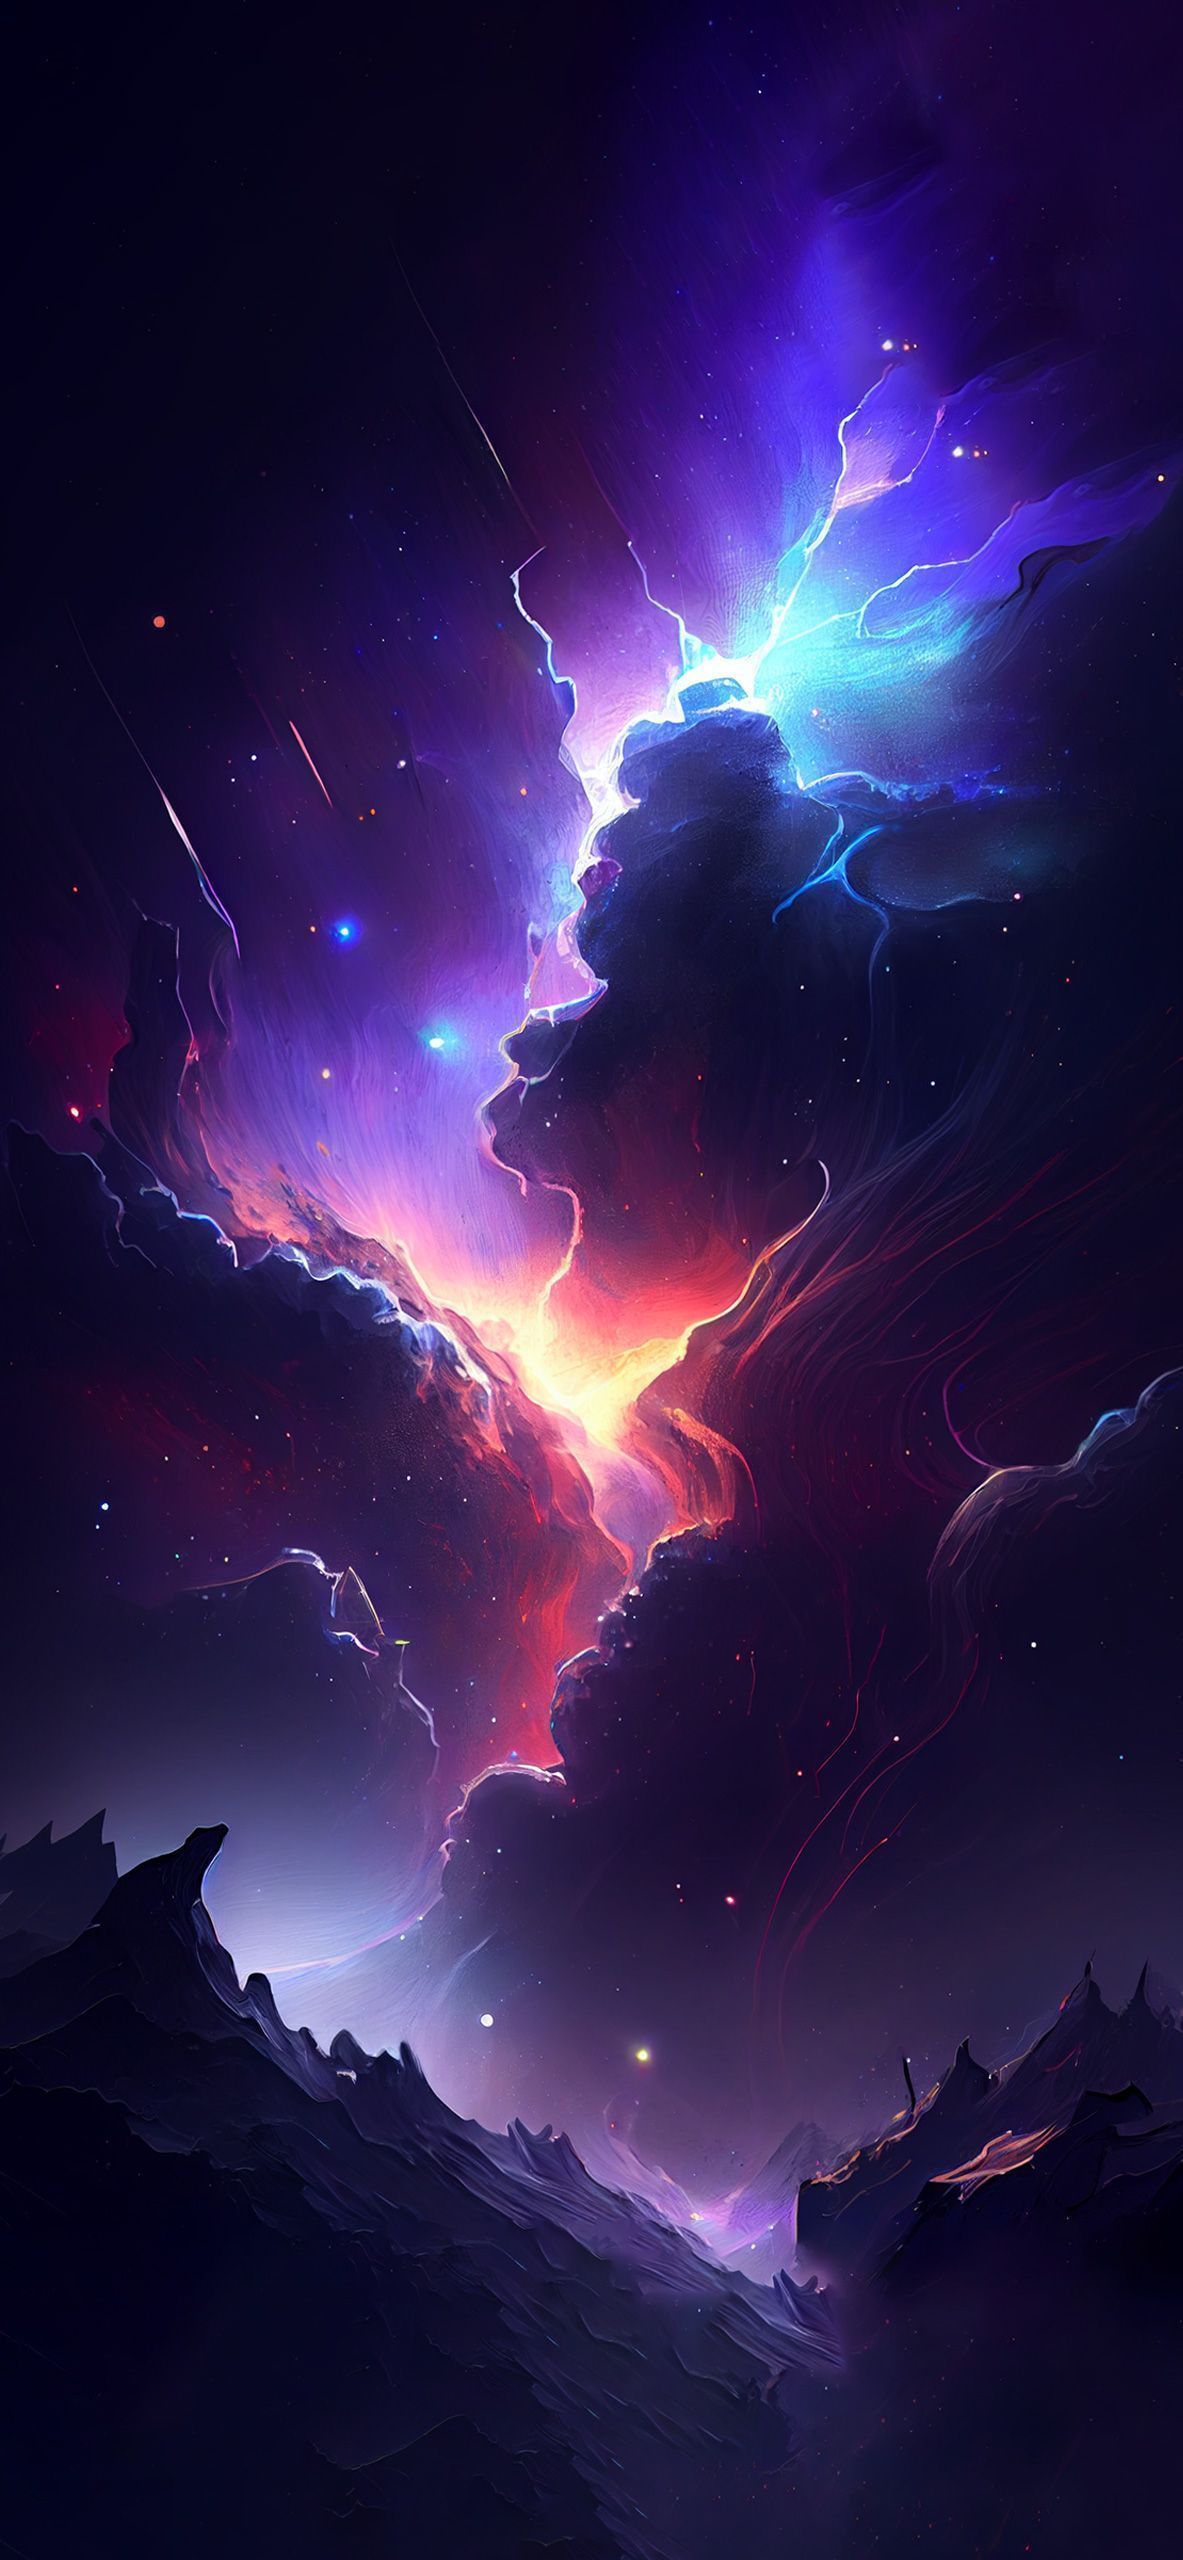 A phone wallpaper of a galaxy with colorful clouds - Galaxy, storm, lightning, space